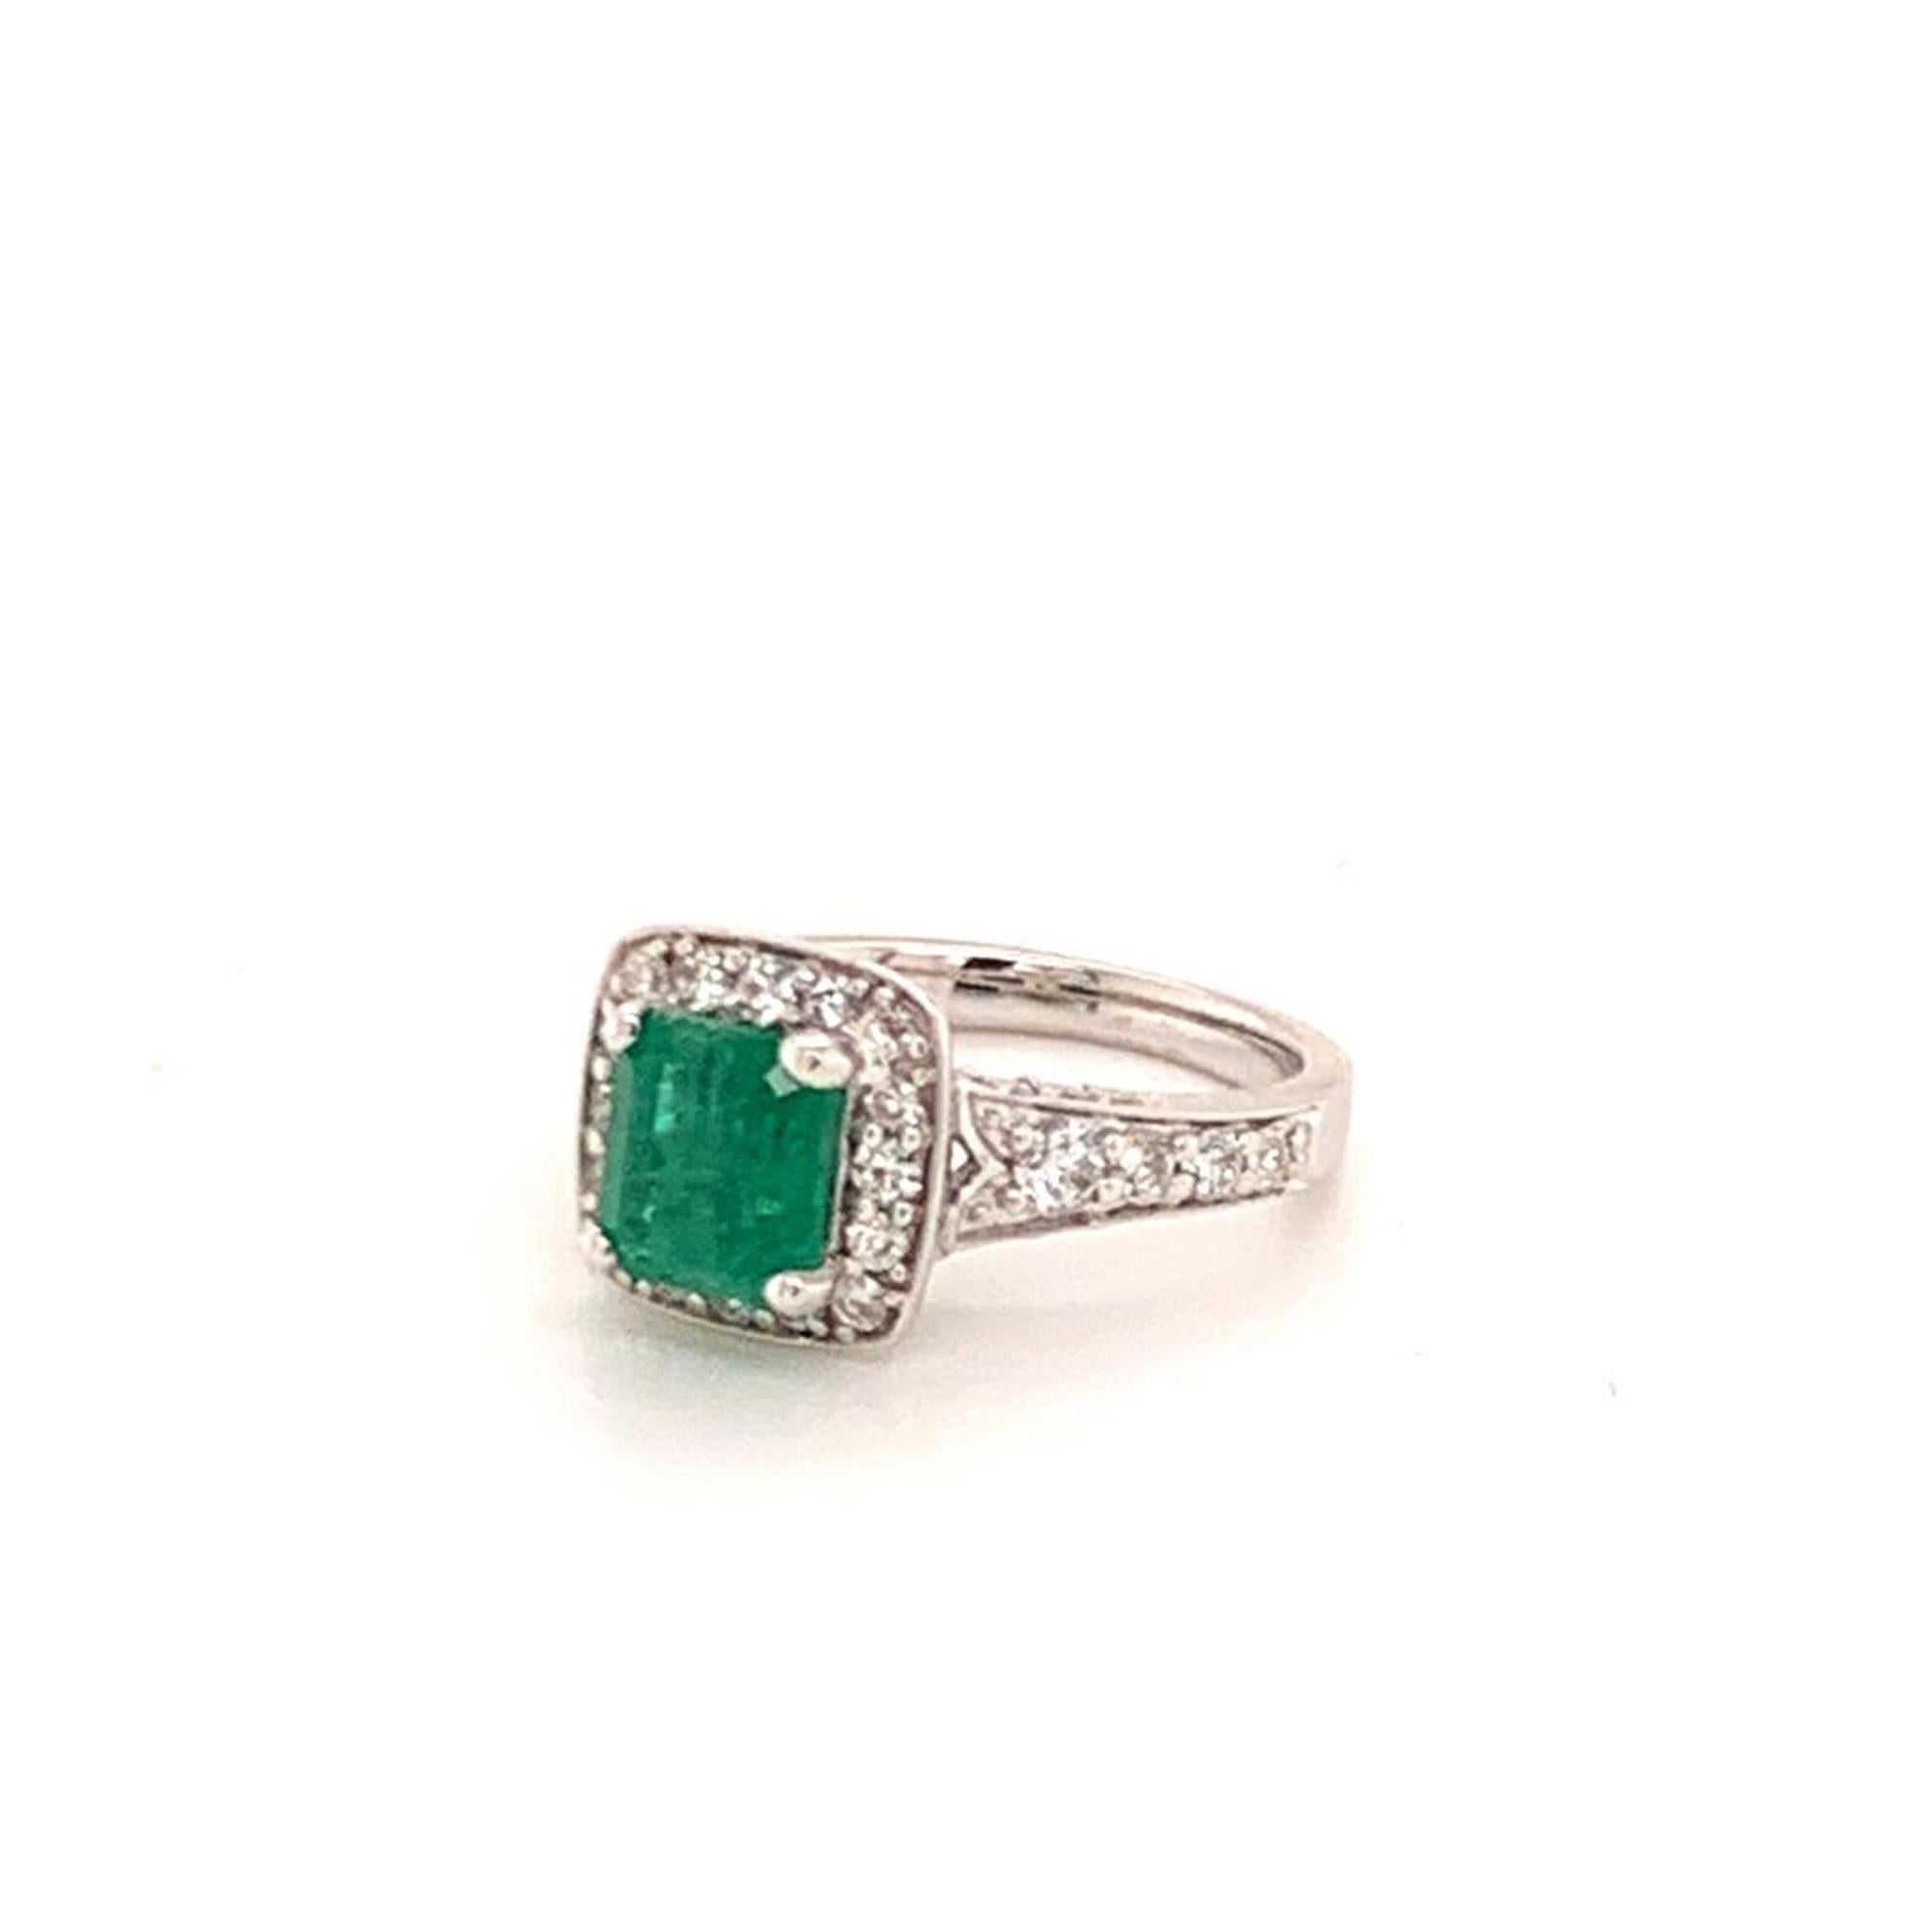 Natural Finely Faceted Quality Emerald Diamond Ring 14k Gold 1.40 TCW Certified $4,950 920938

This is a Unique Custom Made Glamorous Piece of Jewelry!

Nothing says, “I Love you” more than Diamonds and Pearls!

This Emerald ring has been Certified,